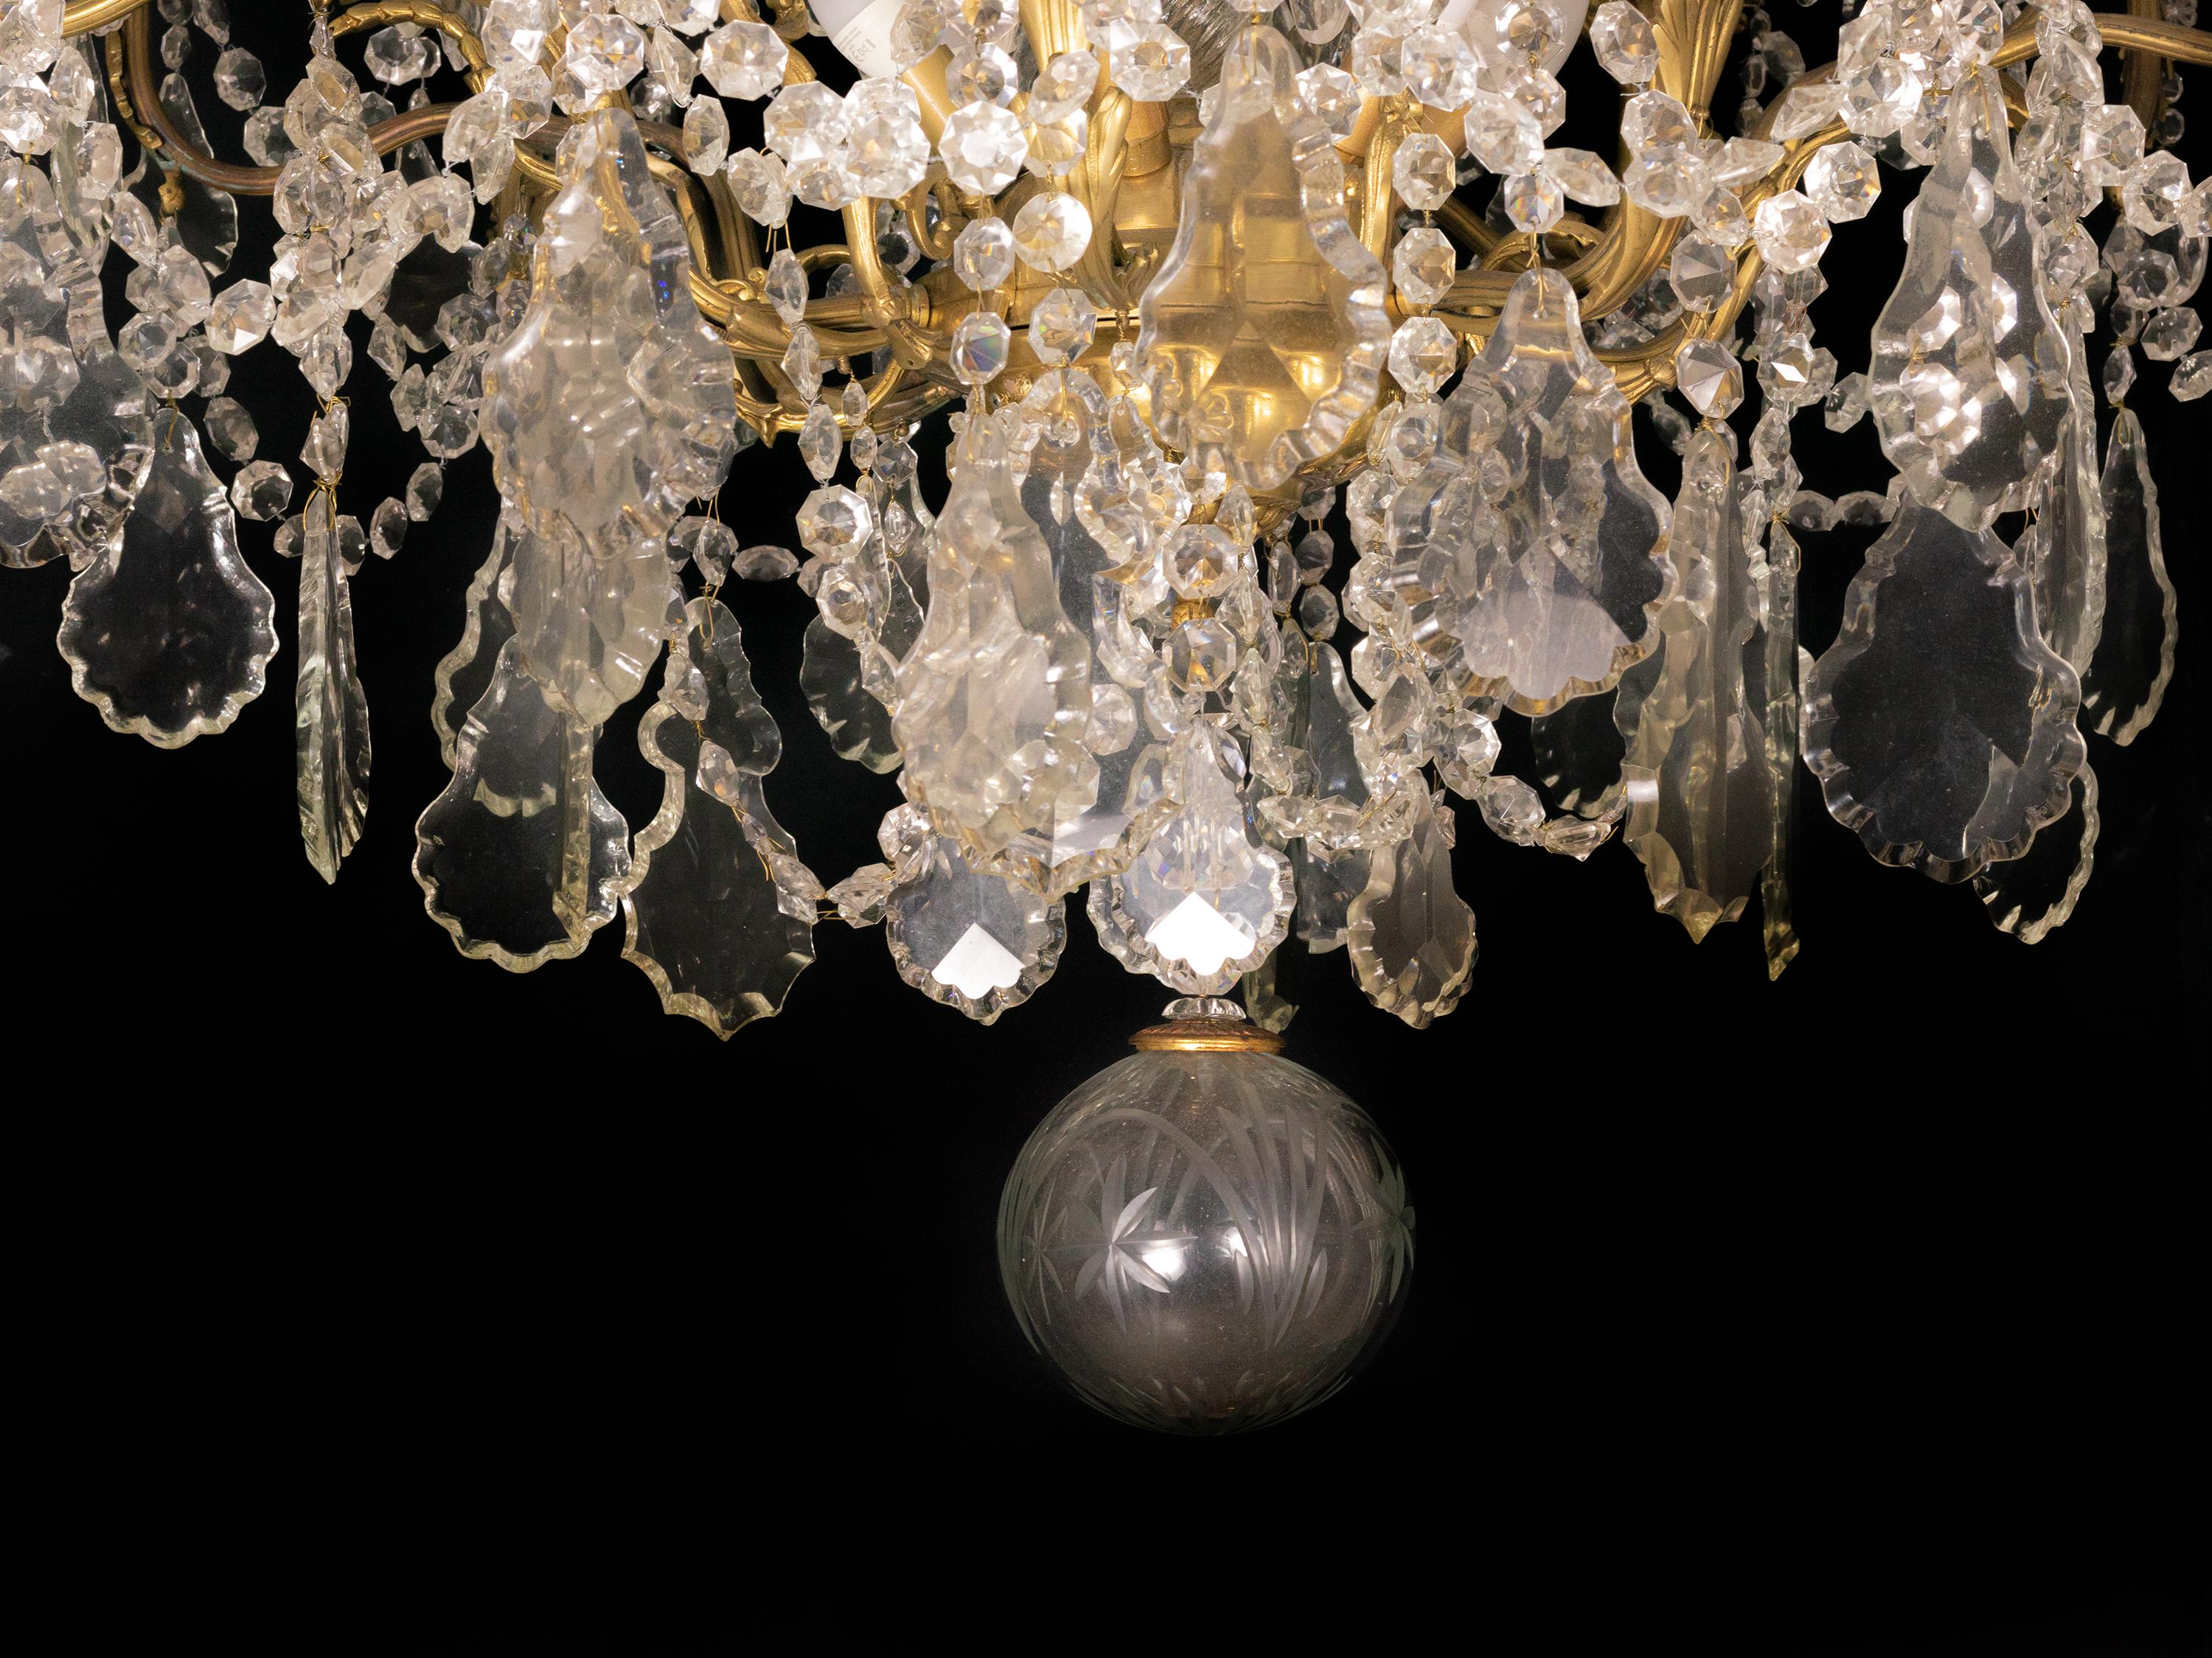 A Classic Louis XV style chandelier having 6 arms and 26 lamps (18 in the arms, 6 below, 1 central light, 1 on the top).

The gilt metal frame is heavily laden with various sized crystal plaquettes. 

Decorated with rare Gilt Versaille Bronze Style